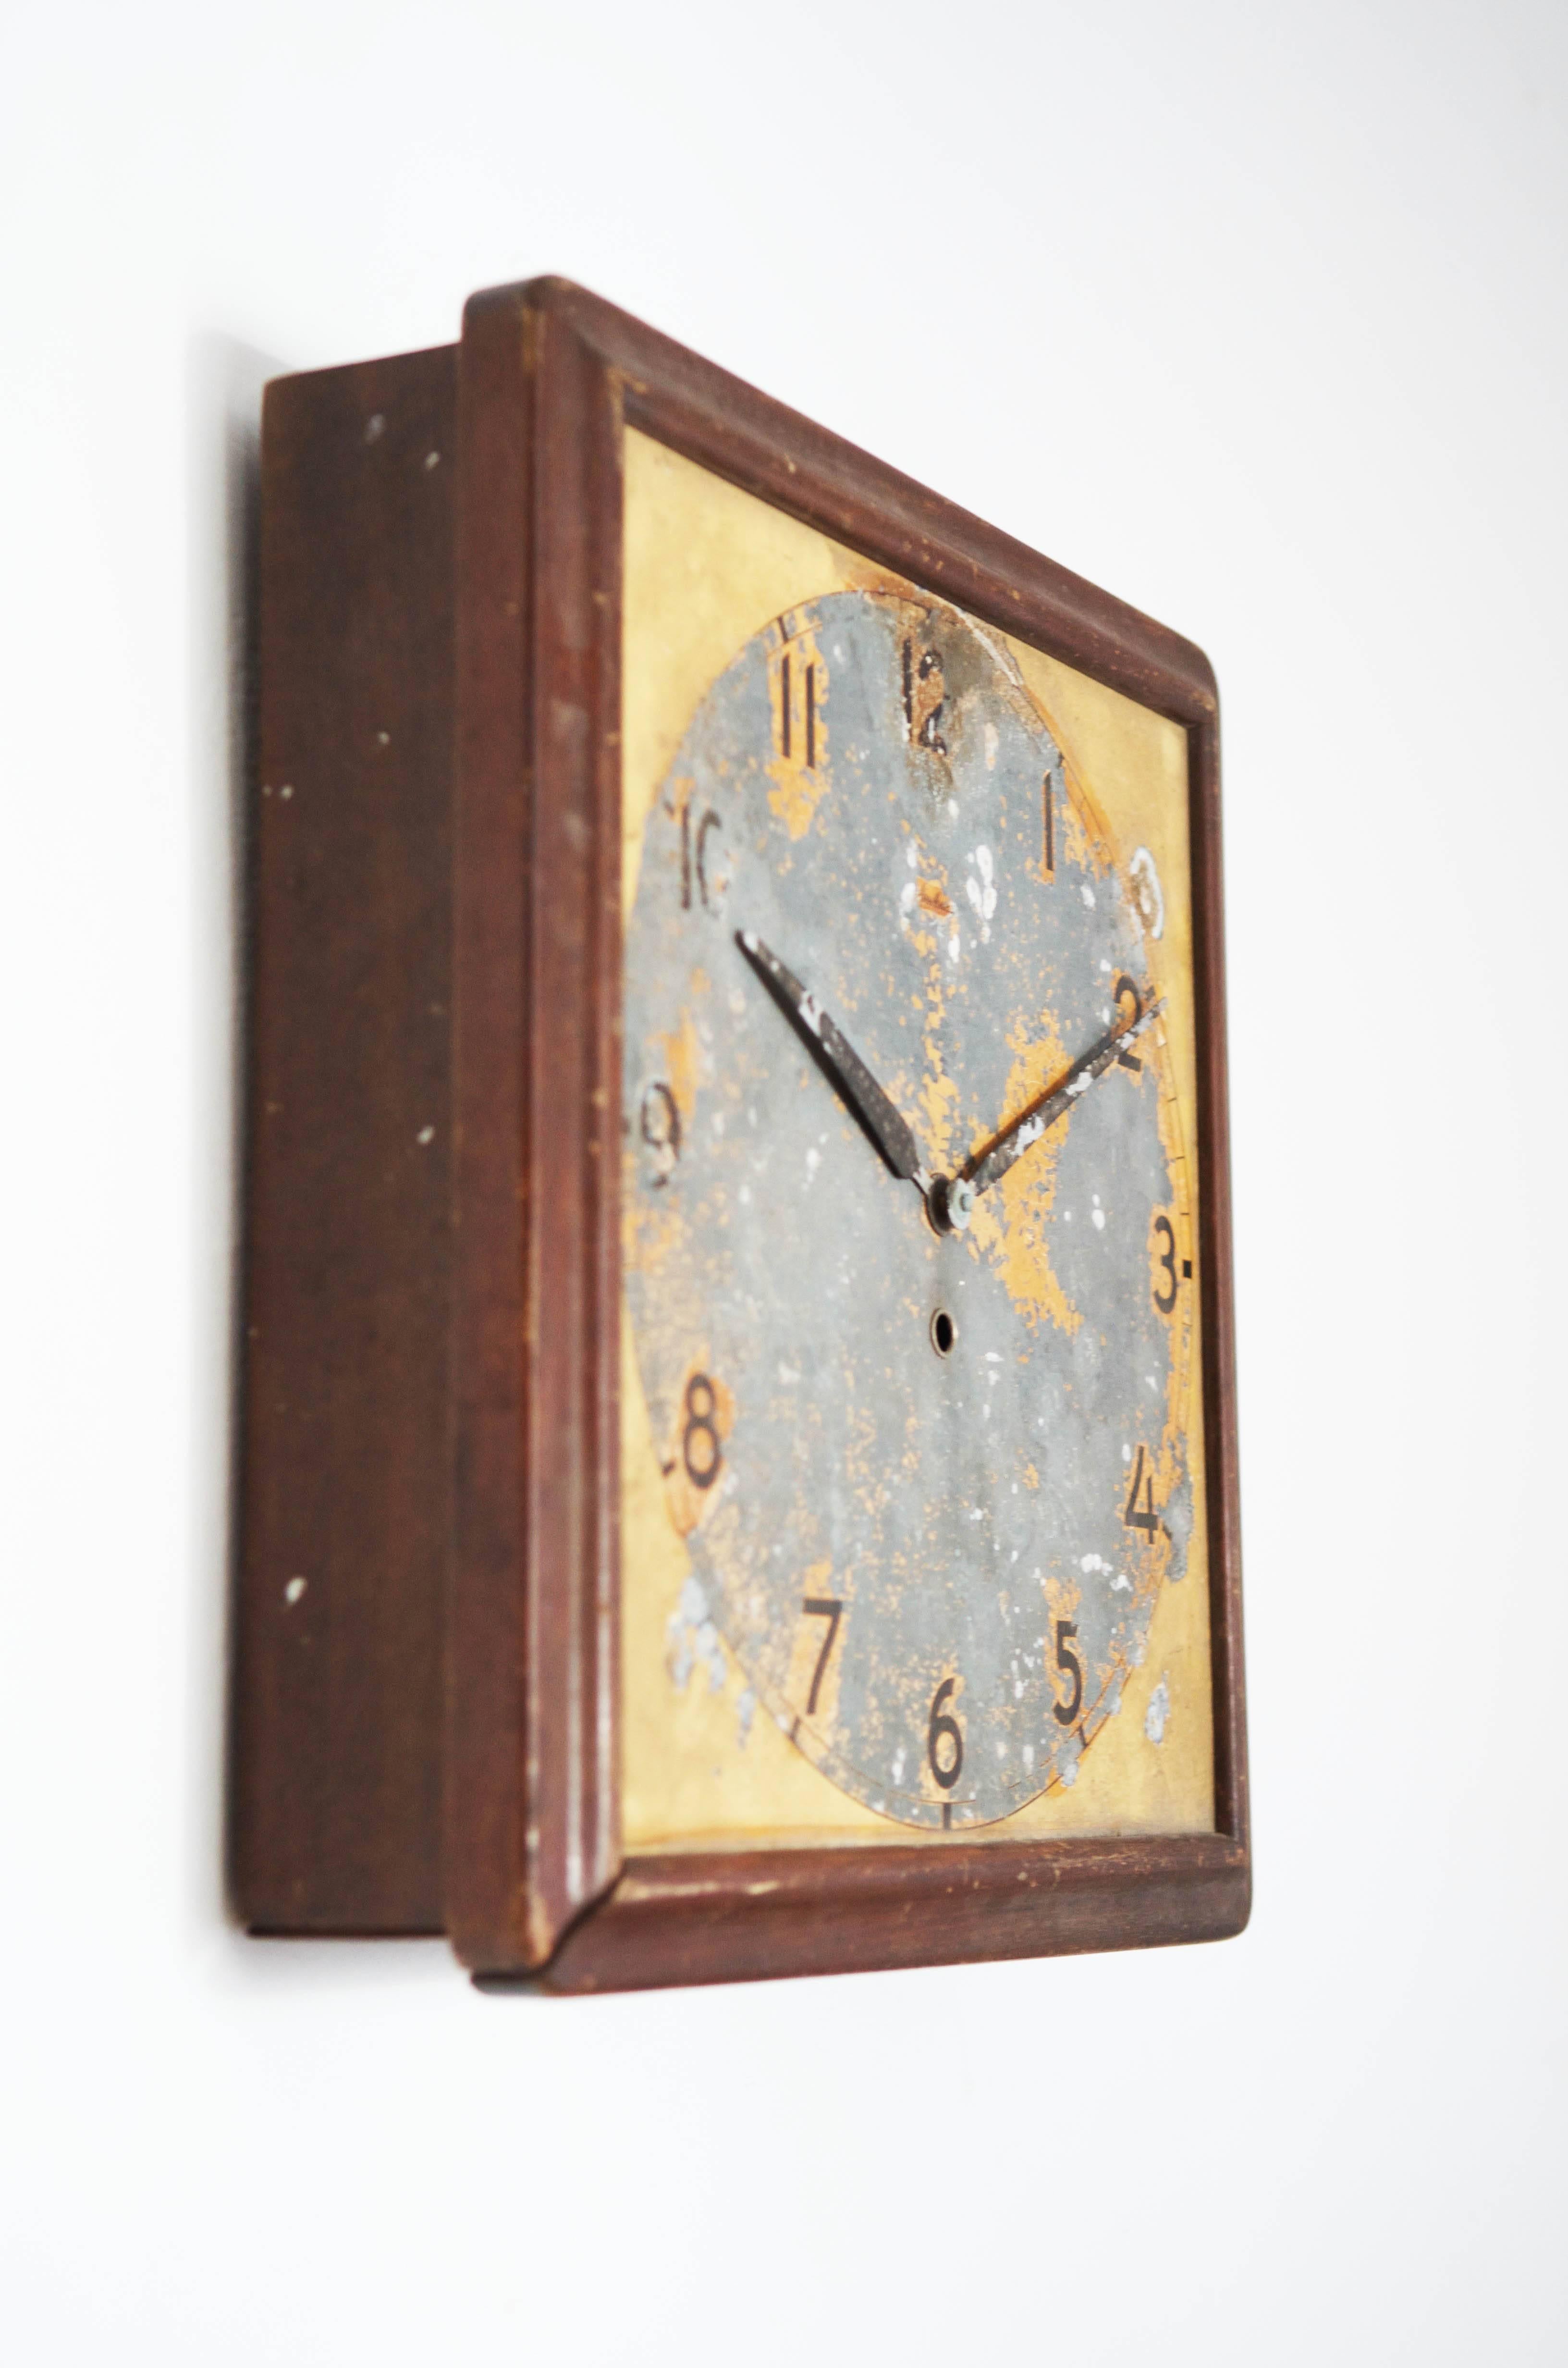 Wooden frame with steel clock face from about 1920's.
The clock is in perfect condition with a nice patina.
Formerly a mechancal movement, now fitted with a modern quartz movement with a battery.
delivery time about 2-3 weeks. 